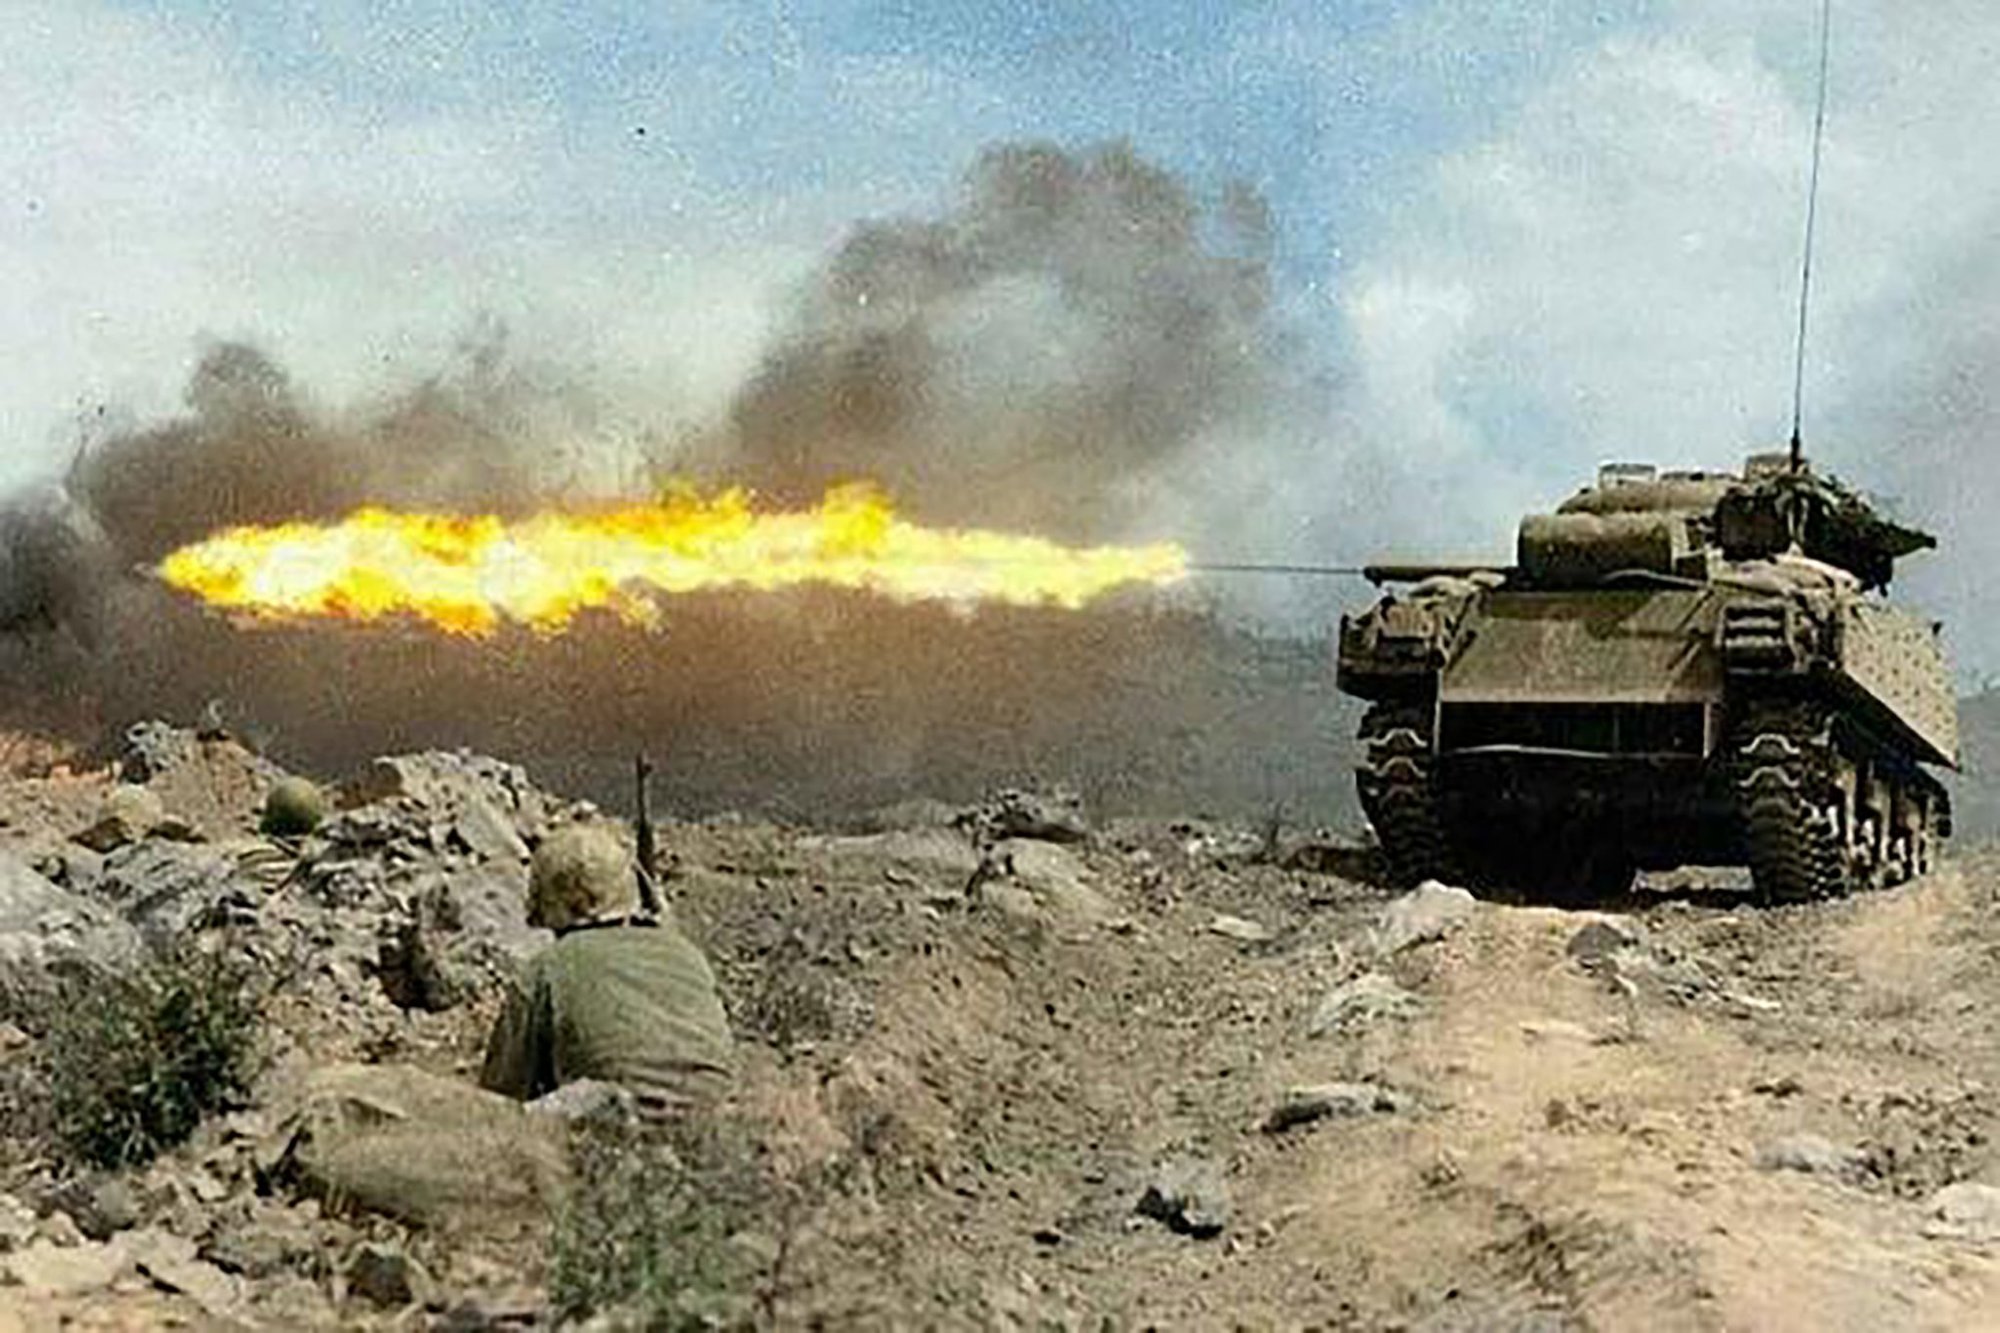 A Marine flame throwing tank, also known as a “Ronson”, scorches a Japanese strongpoint. The eight M4A3 Shermans equipped with the Navy Mark 1 flame-thrower proved to be the most valuable weapons systems on Iwo Jima. (Department of Defense/Mark Kauffman)